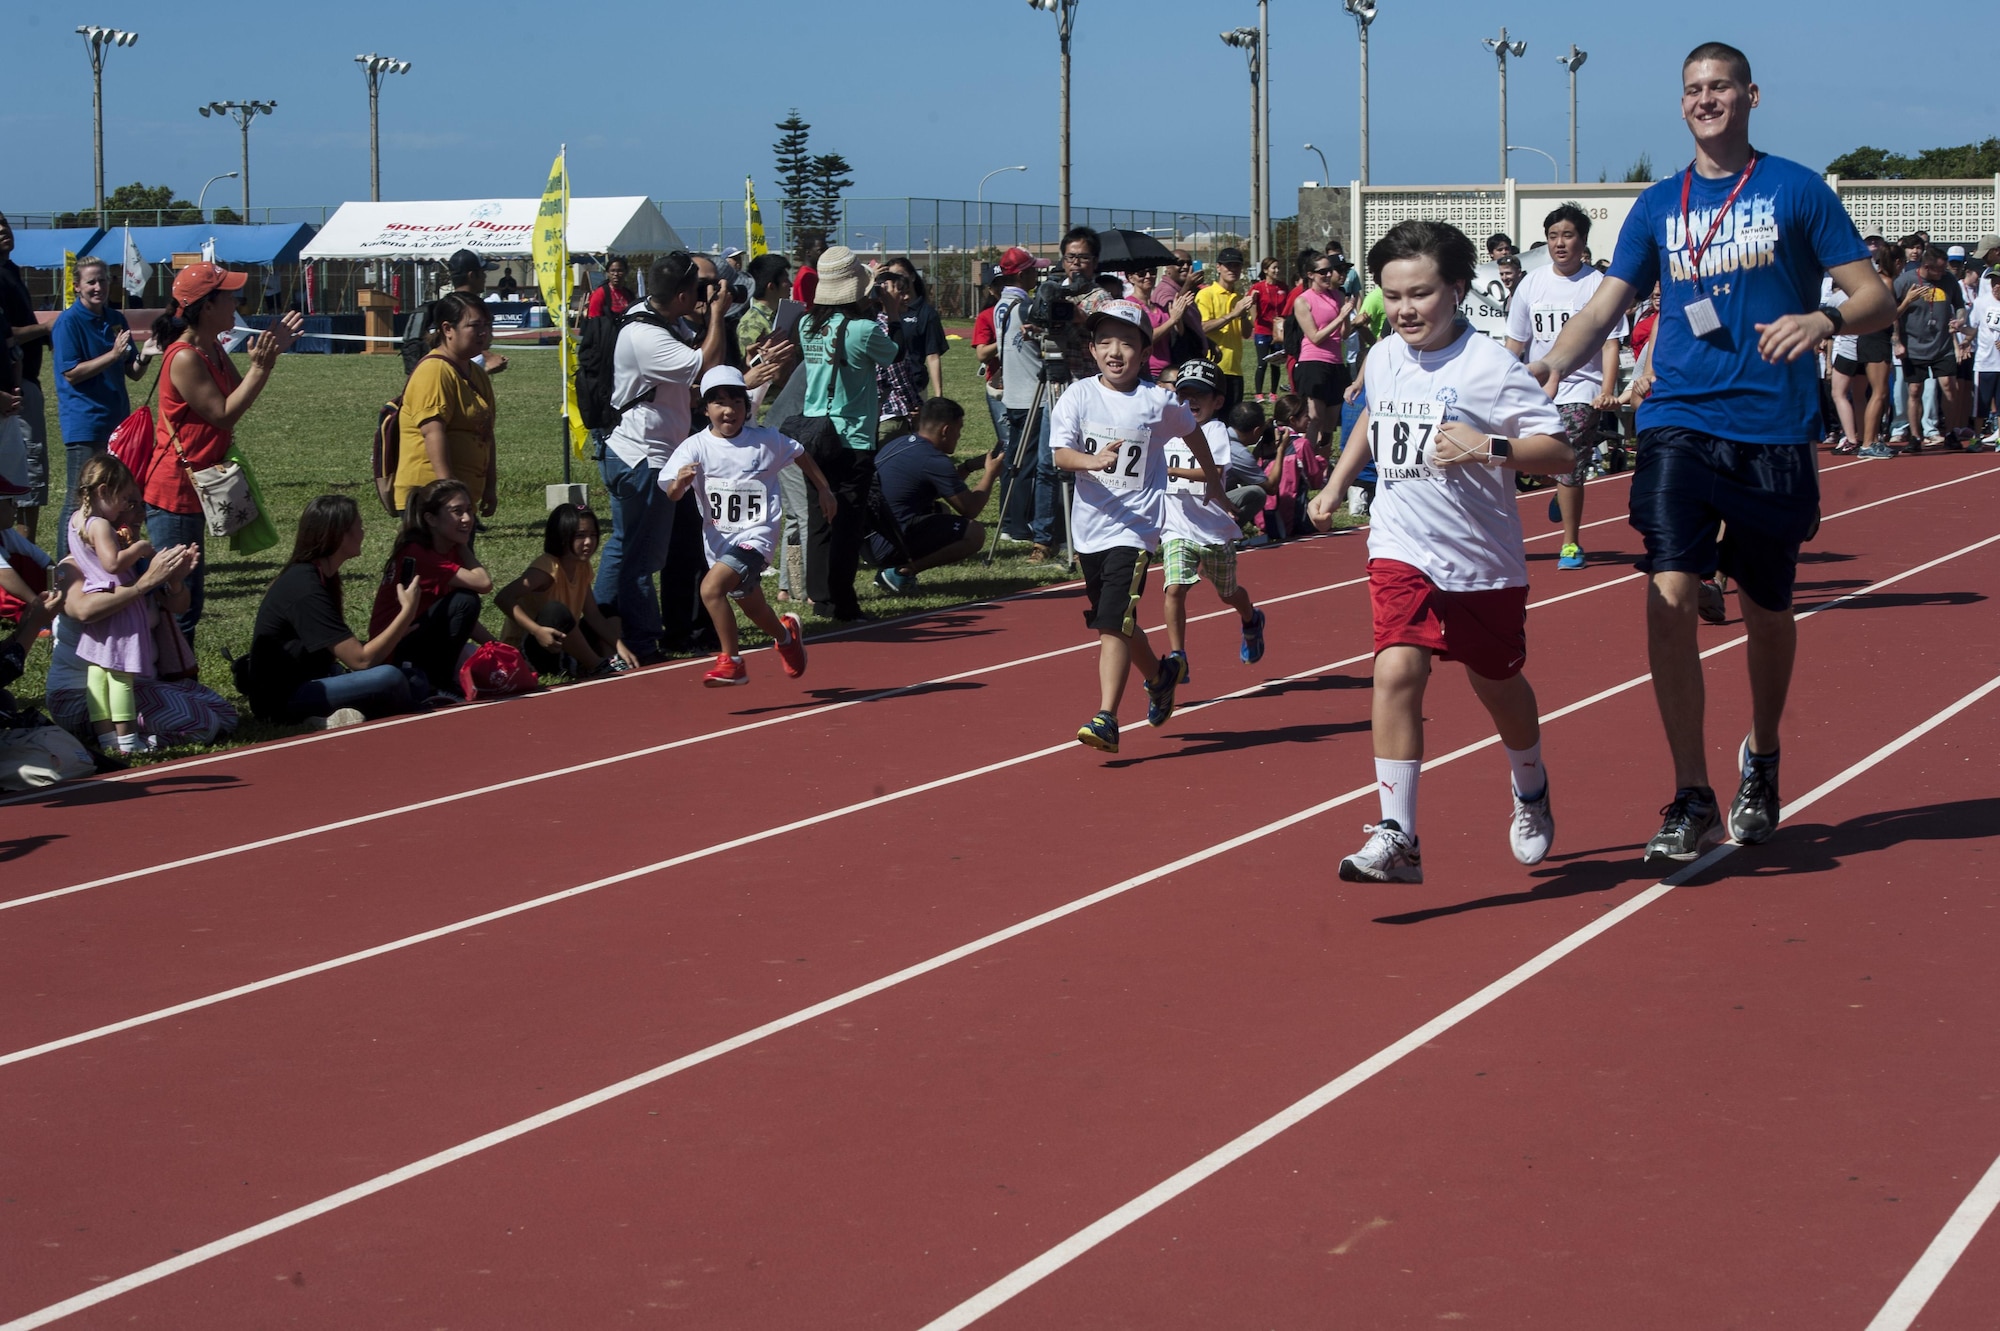 U.S. Air Force Airman 1st Class Anthony Sojka, 18th Component Maintenance Squadron aerospace propulsion apprentice, runs with Teisan Scarborough, a Kadena Special Olympics athlete, during the Kadena Special Olympics Nov. 7, 2015, at Kadena Air Base, Japan. Approximately 1700 volunteers helped nearly 900 athletes arrive to their events and compete in the largest overseas Special Olympics in the world. (U.S. Air Force photo by Airman 1st Class Lynette M. Rolen/Released)